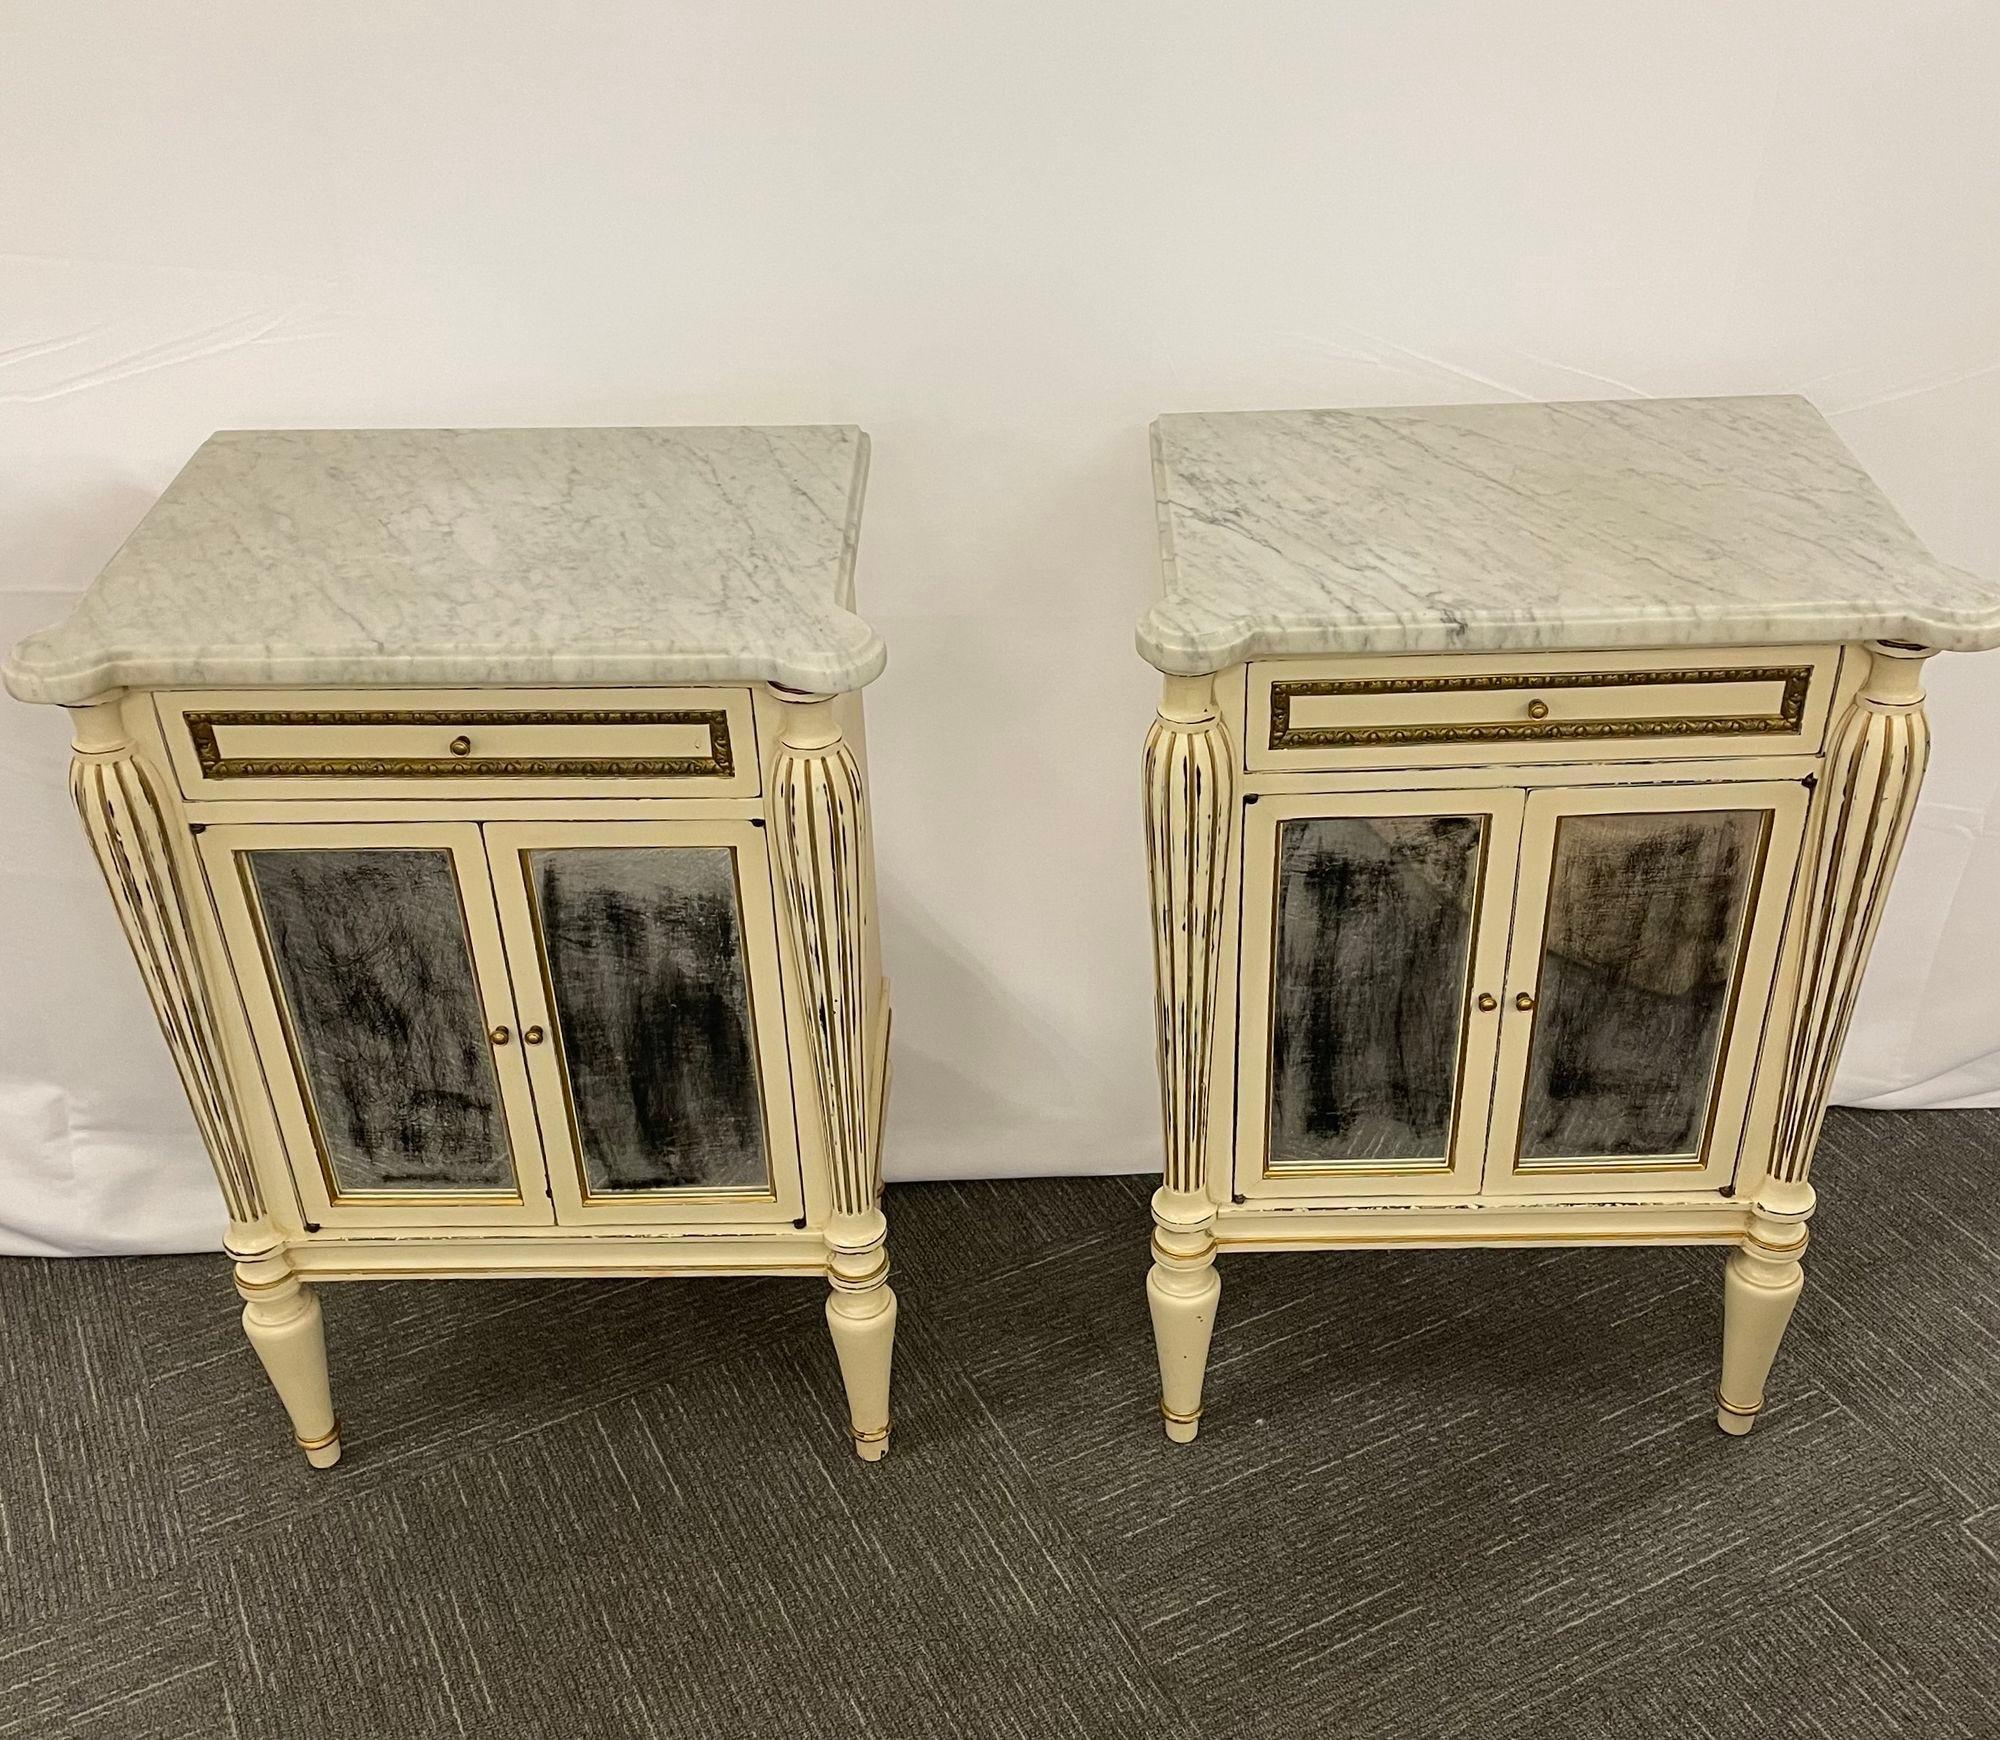 Hollywood Regency Pair White Painted Marble-Top End Tables Distressed Mirrored Cabinets by Jansen